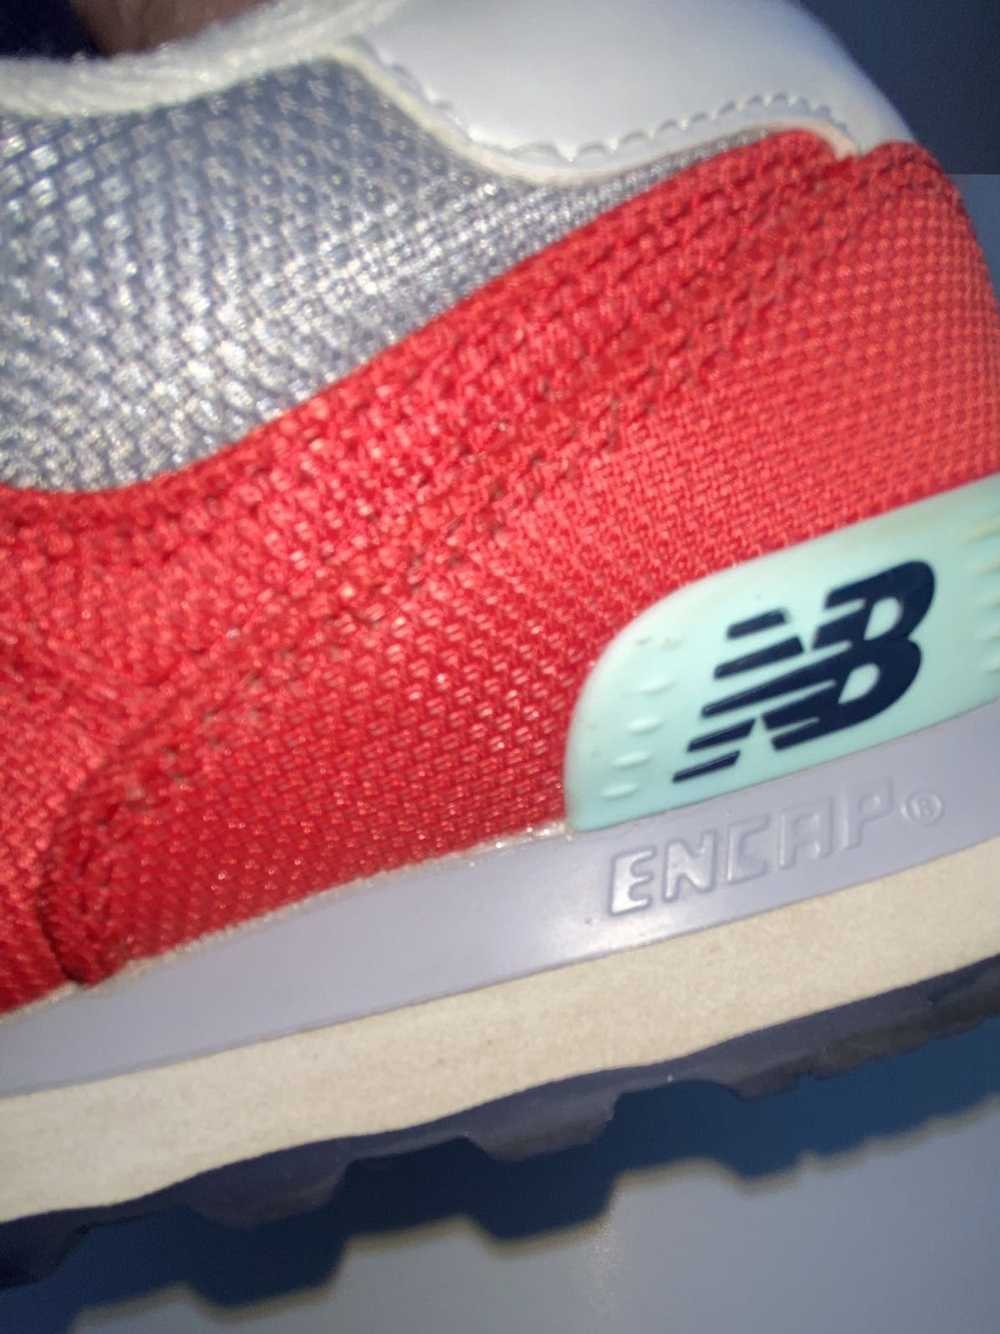 New Balance New Balance 574 Econ red teal shoes - image 10